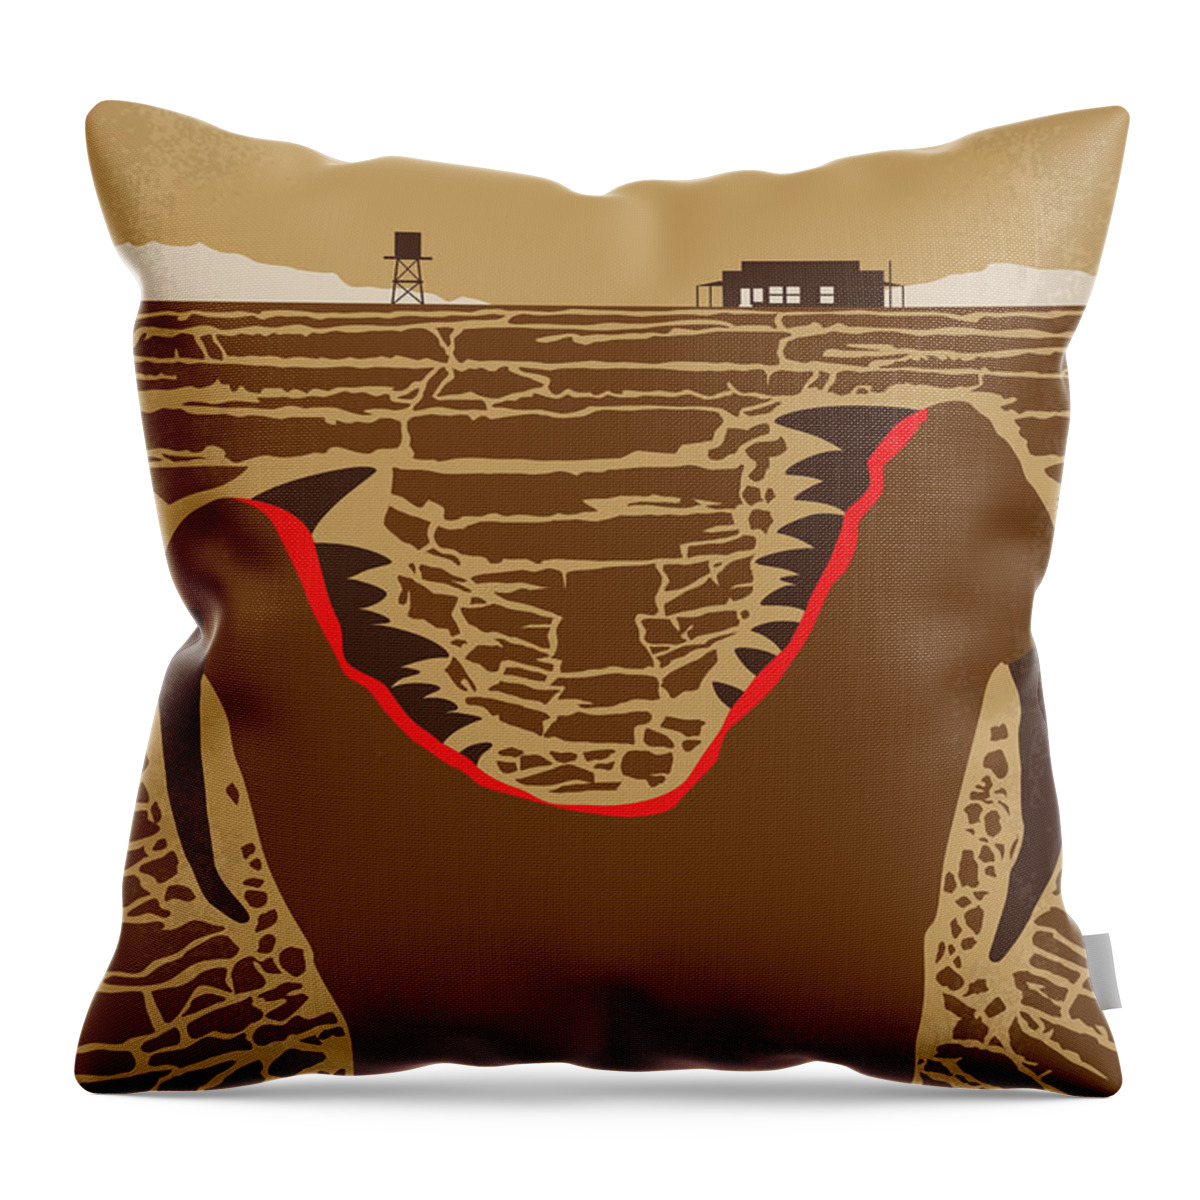 Tremors Throw Pillow featuring the digital art No688 My Tremors minimal movie poster by Chungkong Art